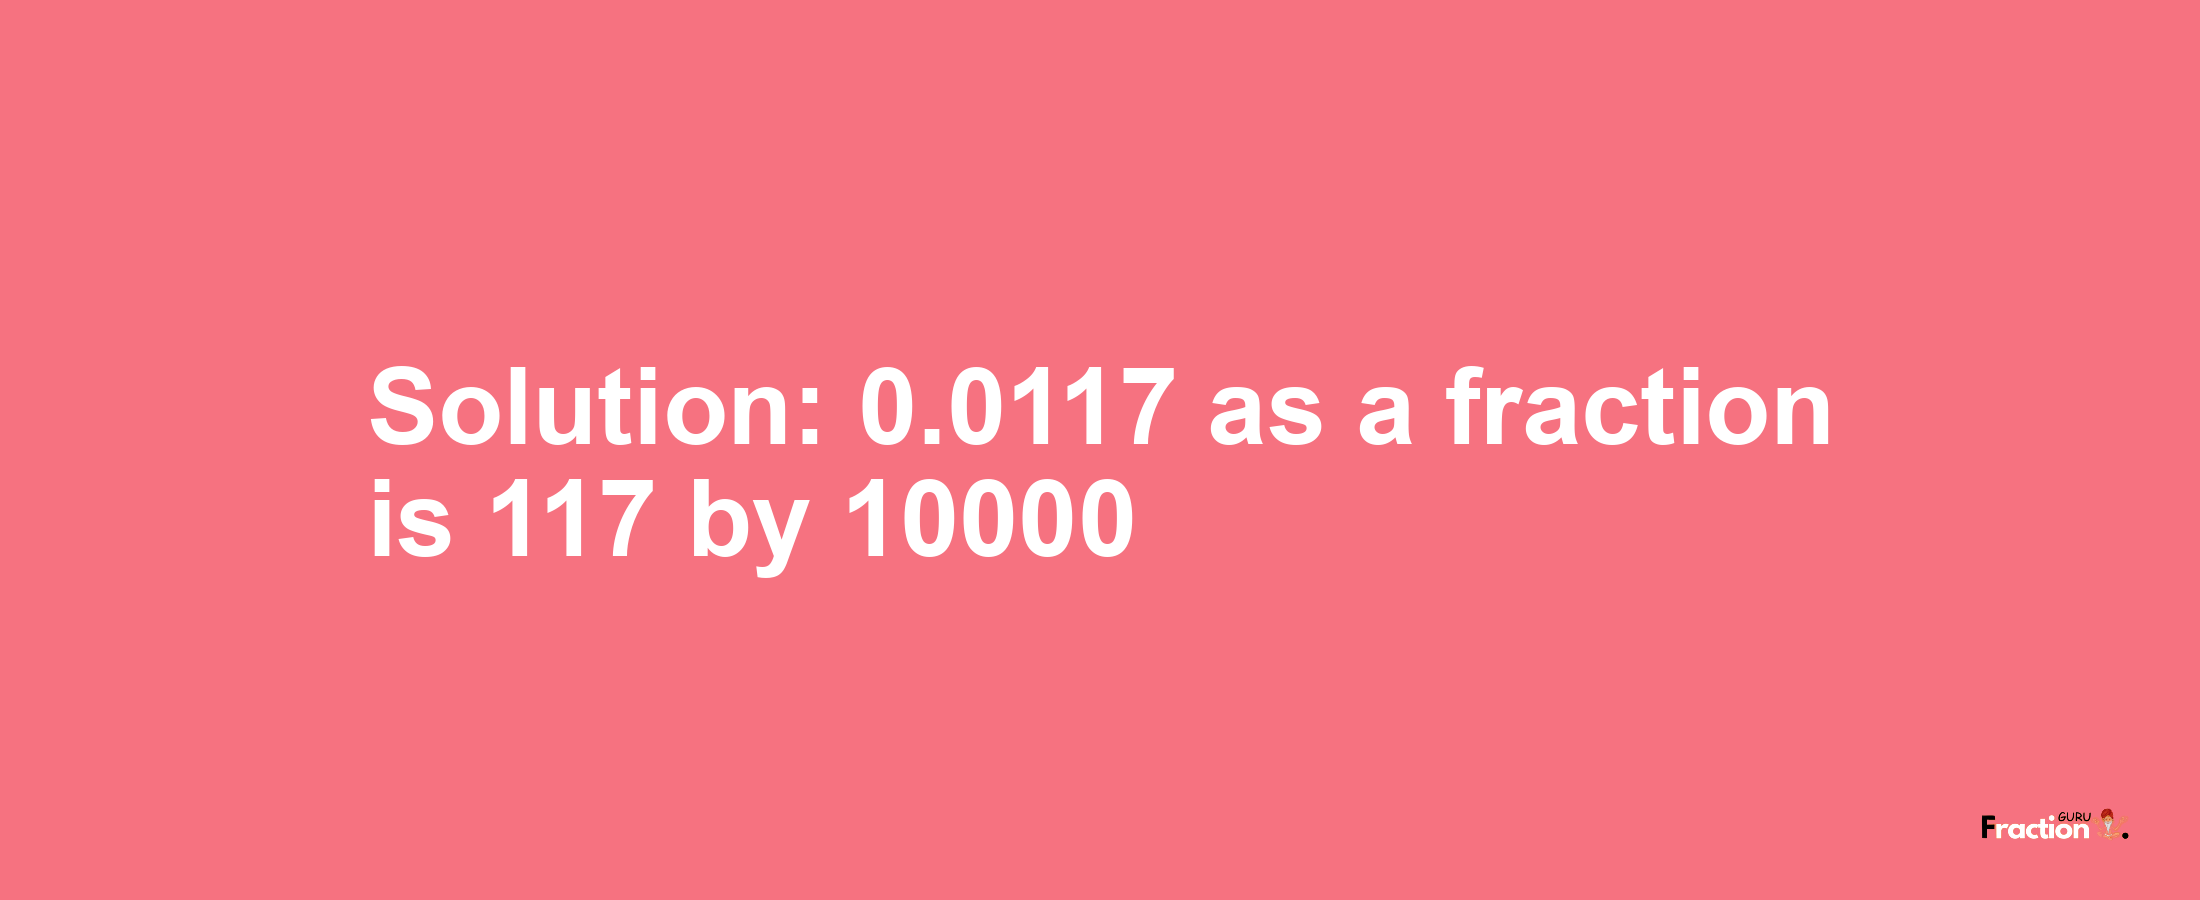 Solution:0.0117 as a fraction is 117/10000